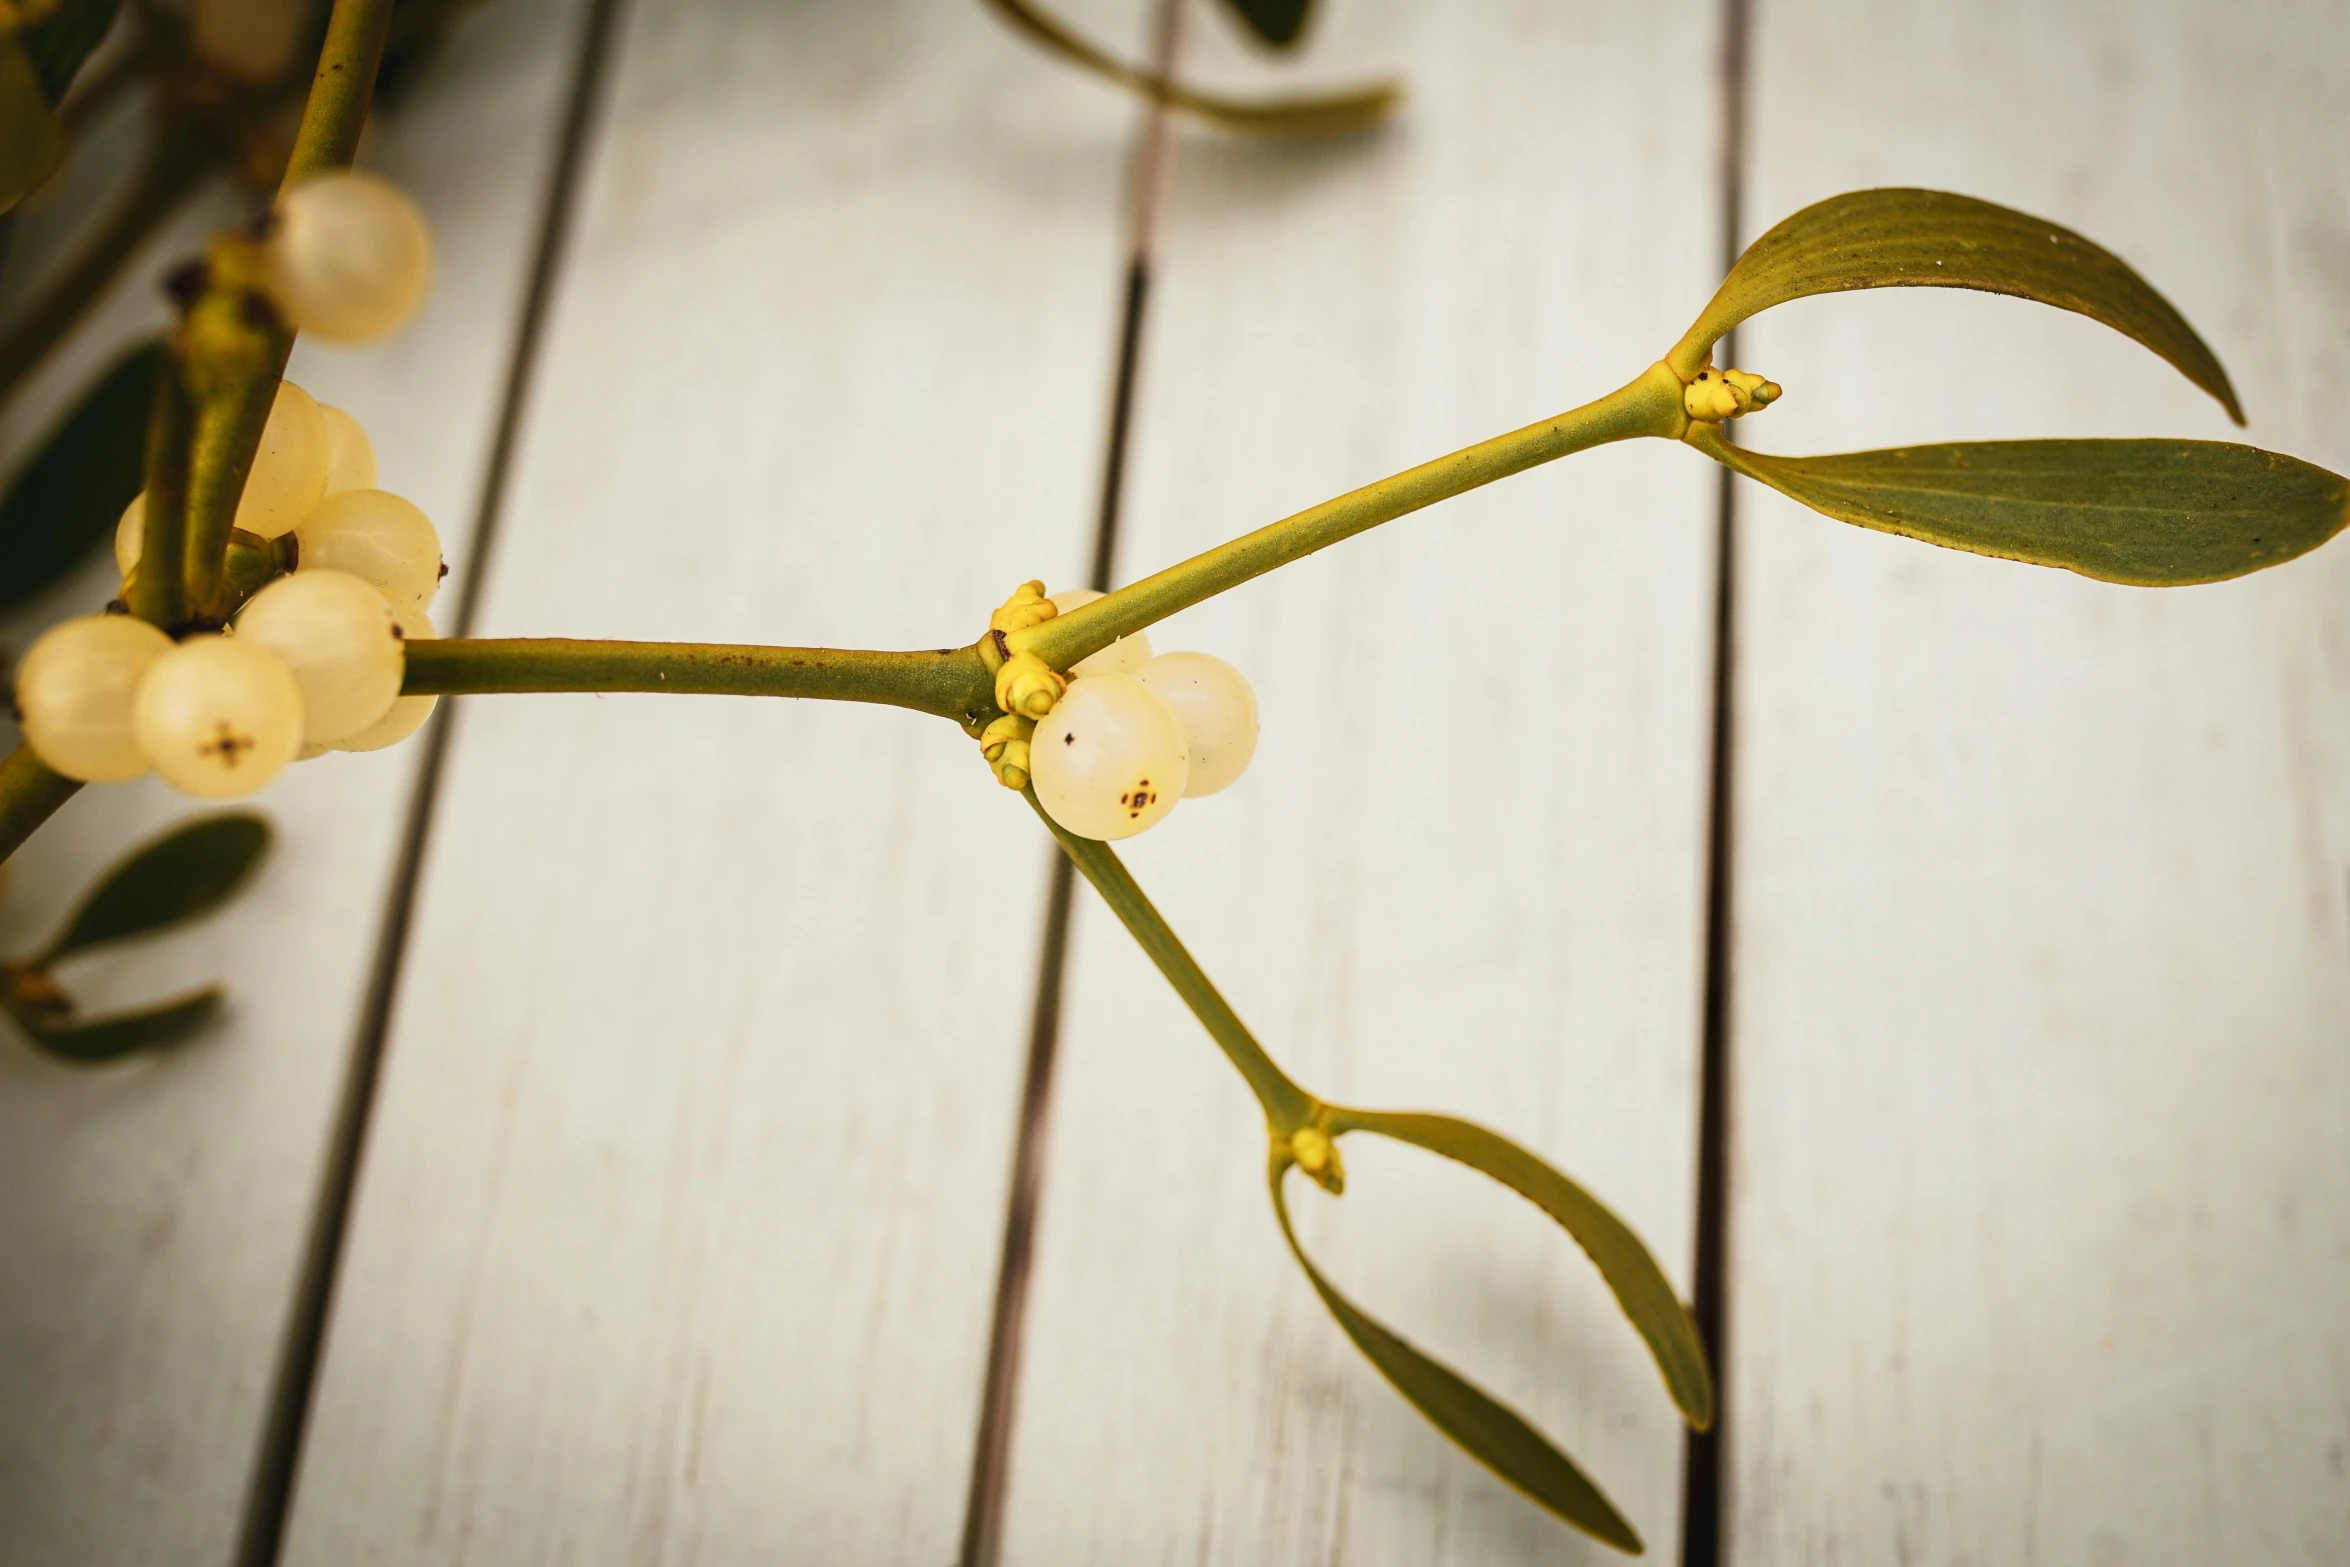 a twig and flower with white flowers on the stem